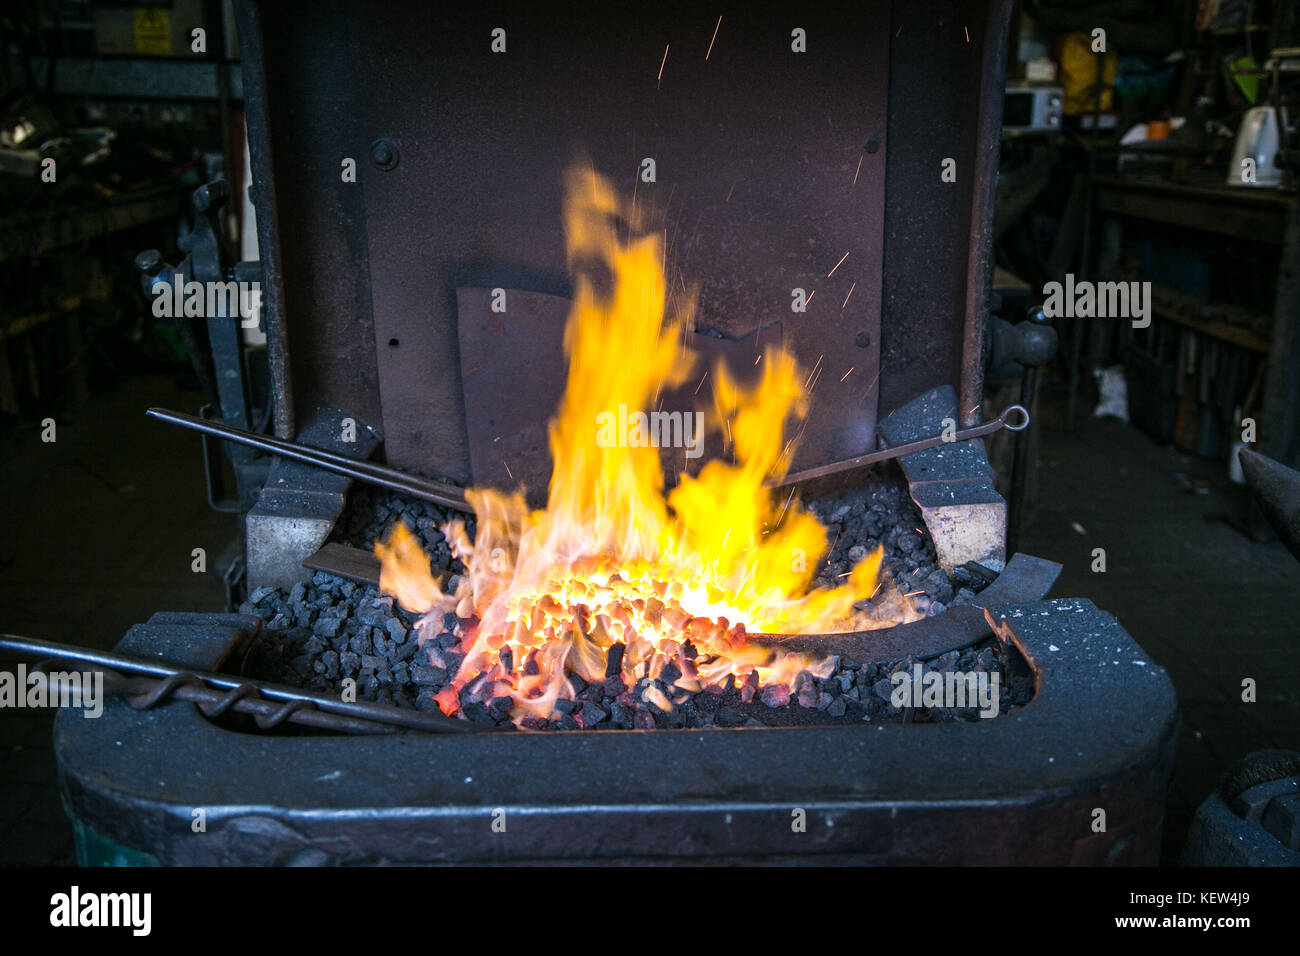 February 10, 2015 - London, United Kingdom - An example of blacksmith furnace fireplace...A blacksmith is someone who creates artificial objects from raw iron or steel by forging them to make new creative products such as furniture, agricultural implements, gates, grilles, cooking utensils, railings, light fixtures, sculpture, tools, decorative and religious items, and weapons. Although, there are some more other carriers that are related such as wheelwrights, armors and furriers. The blacksmith has the general knowledge to create and repair many things which has been made with metal, such as  Stock Photo